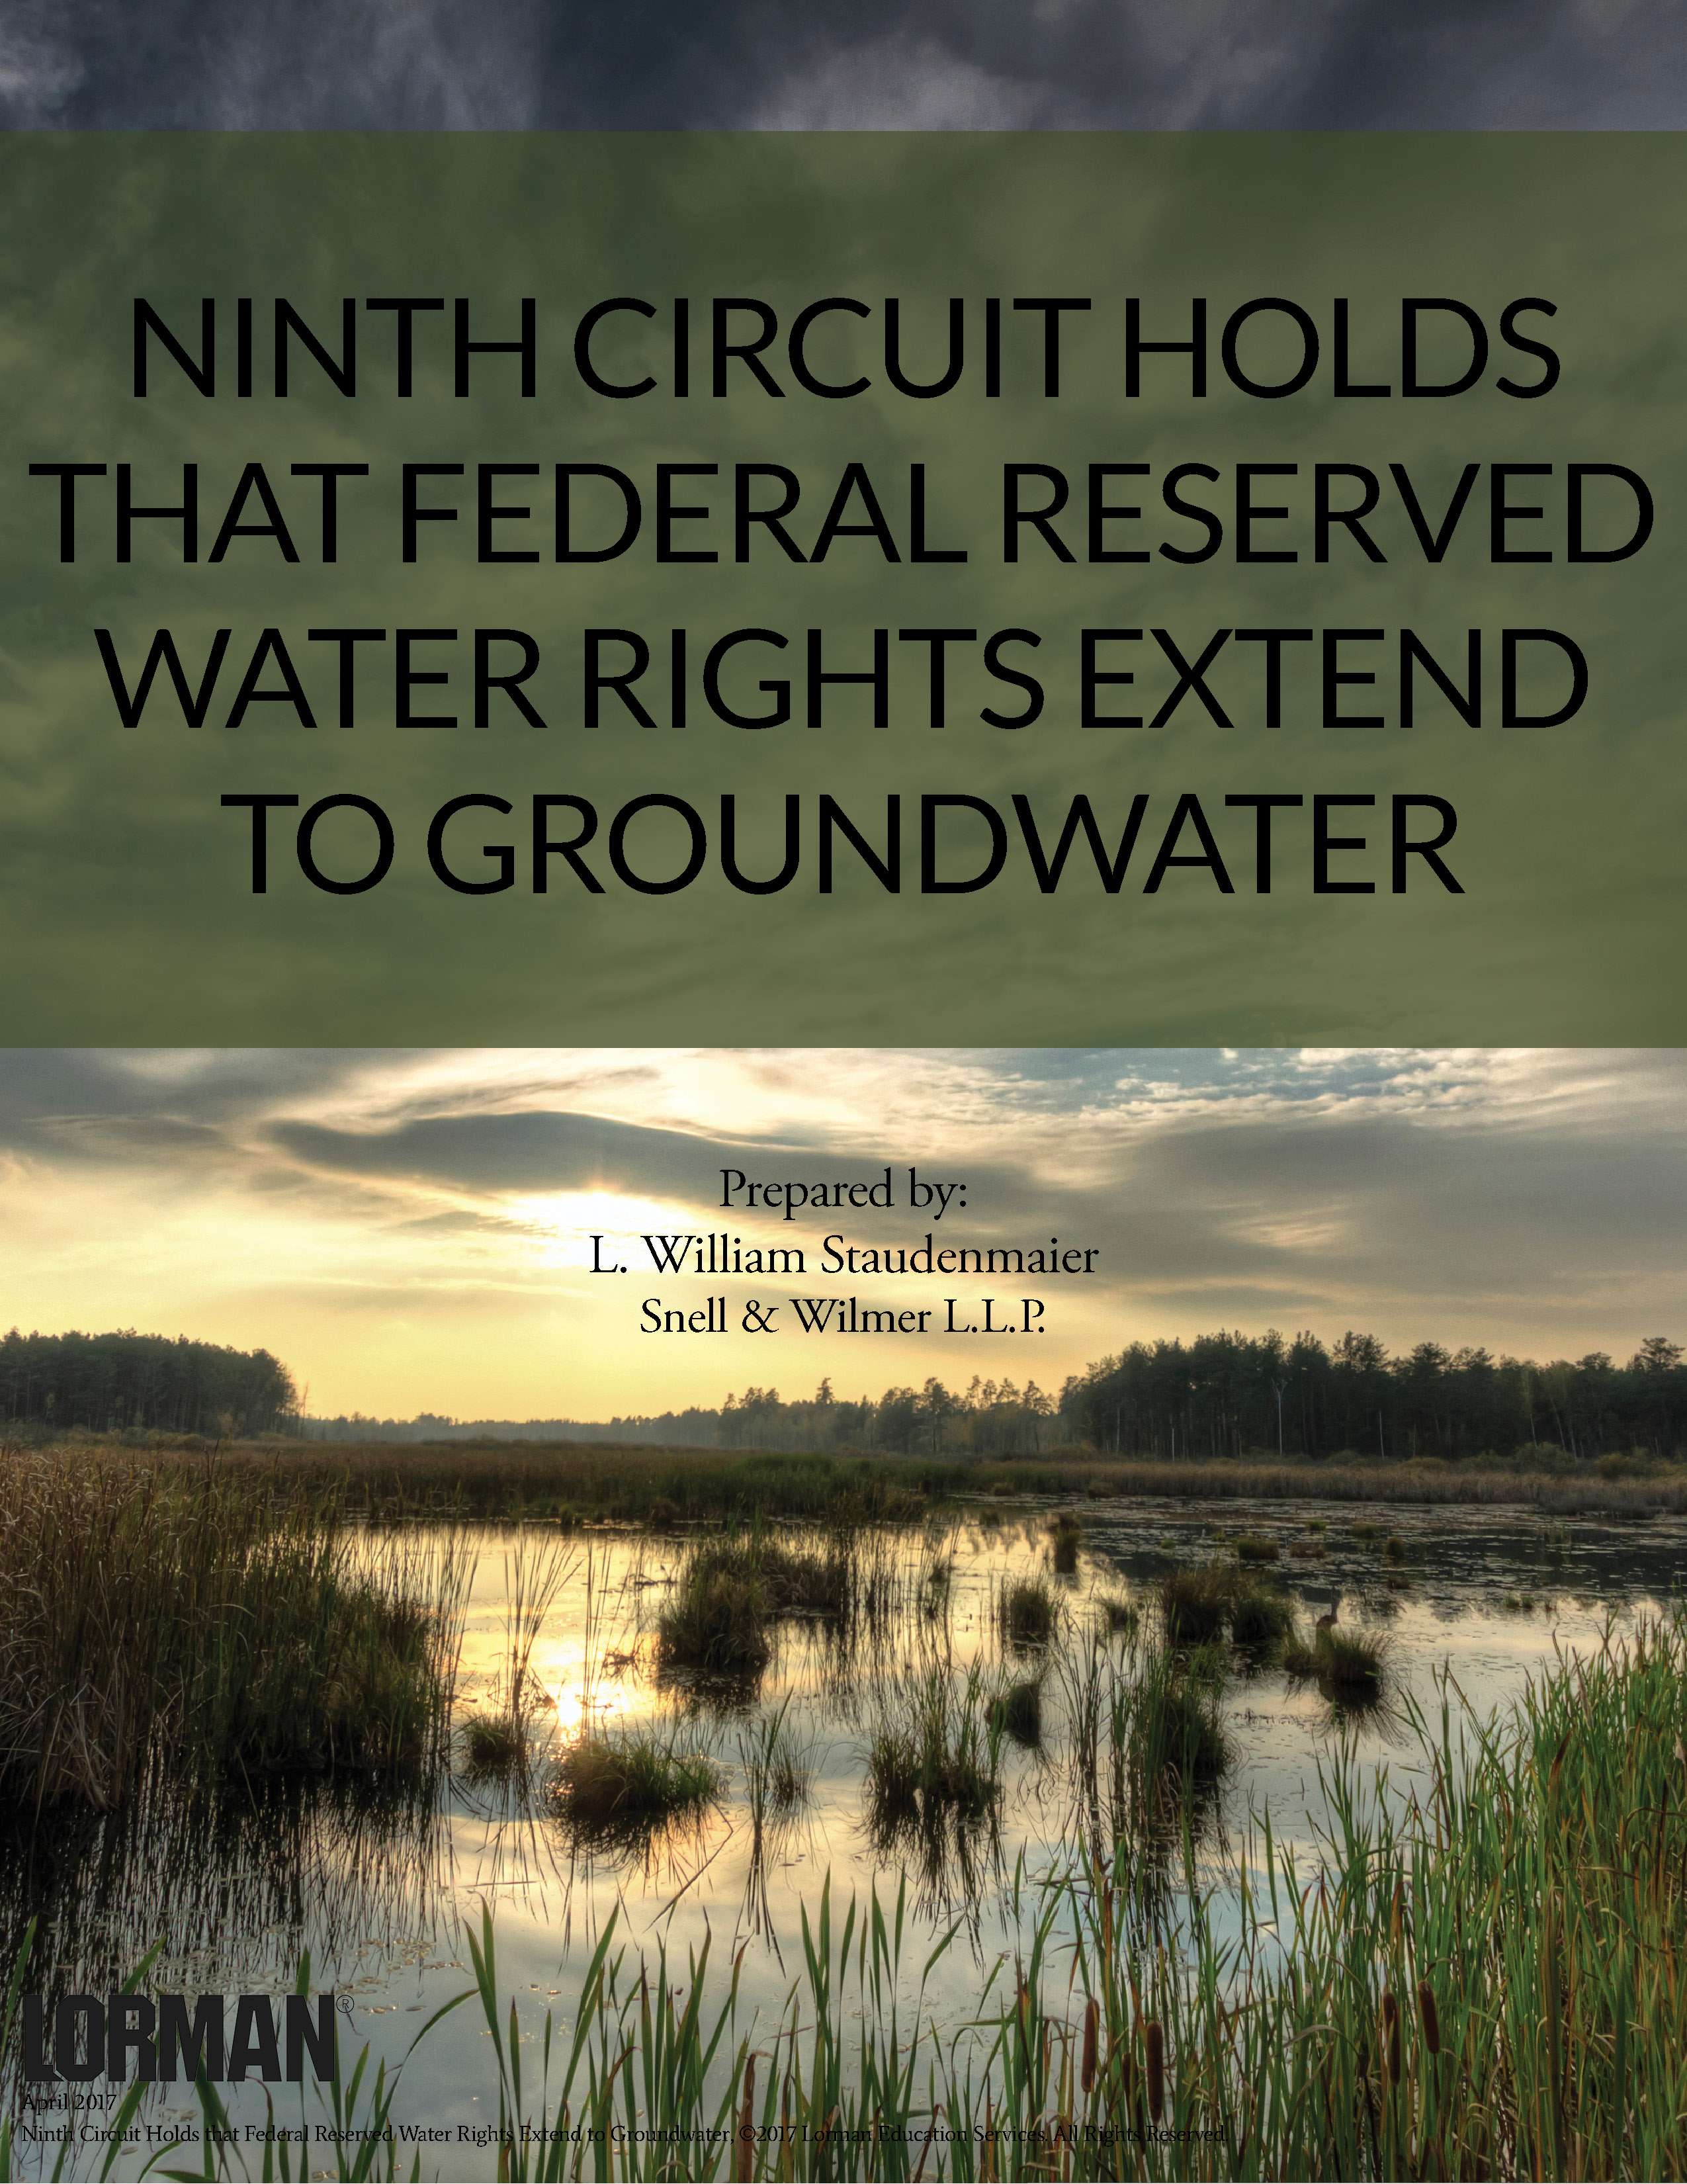 Ninth Circuit Holds that Federal Reserved Water Rights Extend to Groundwater